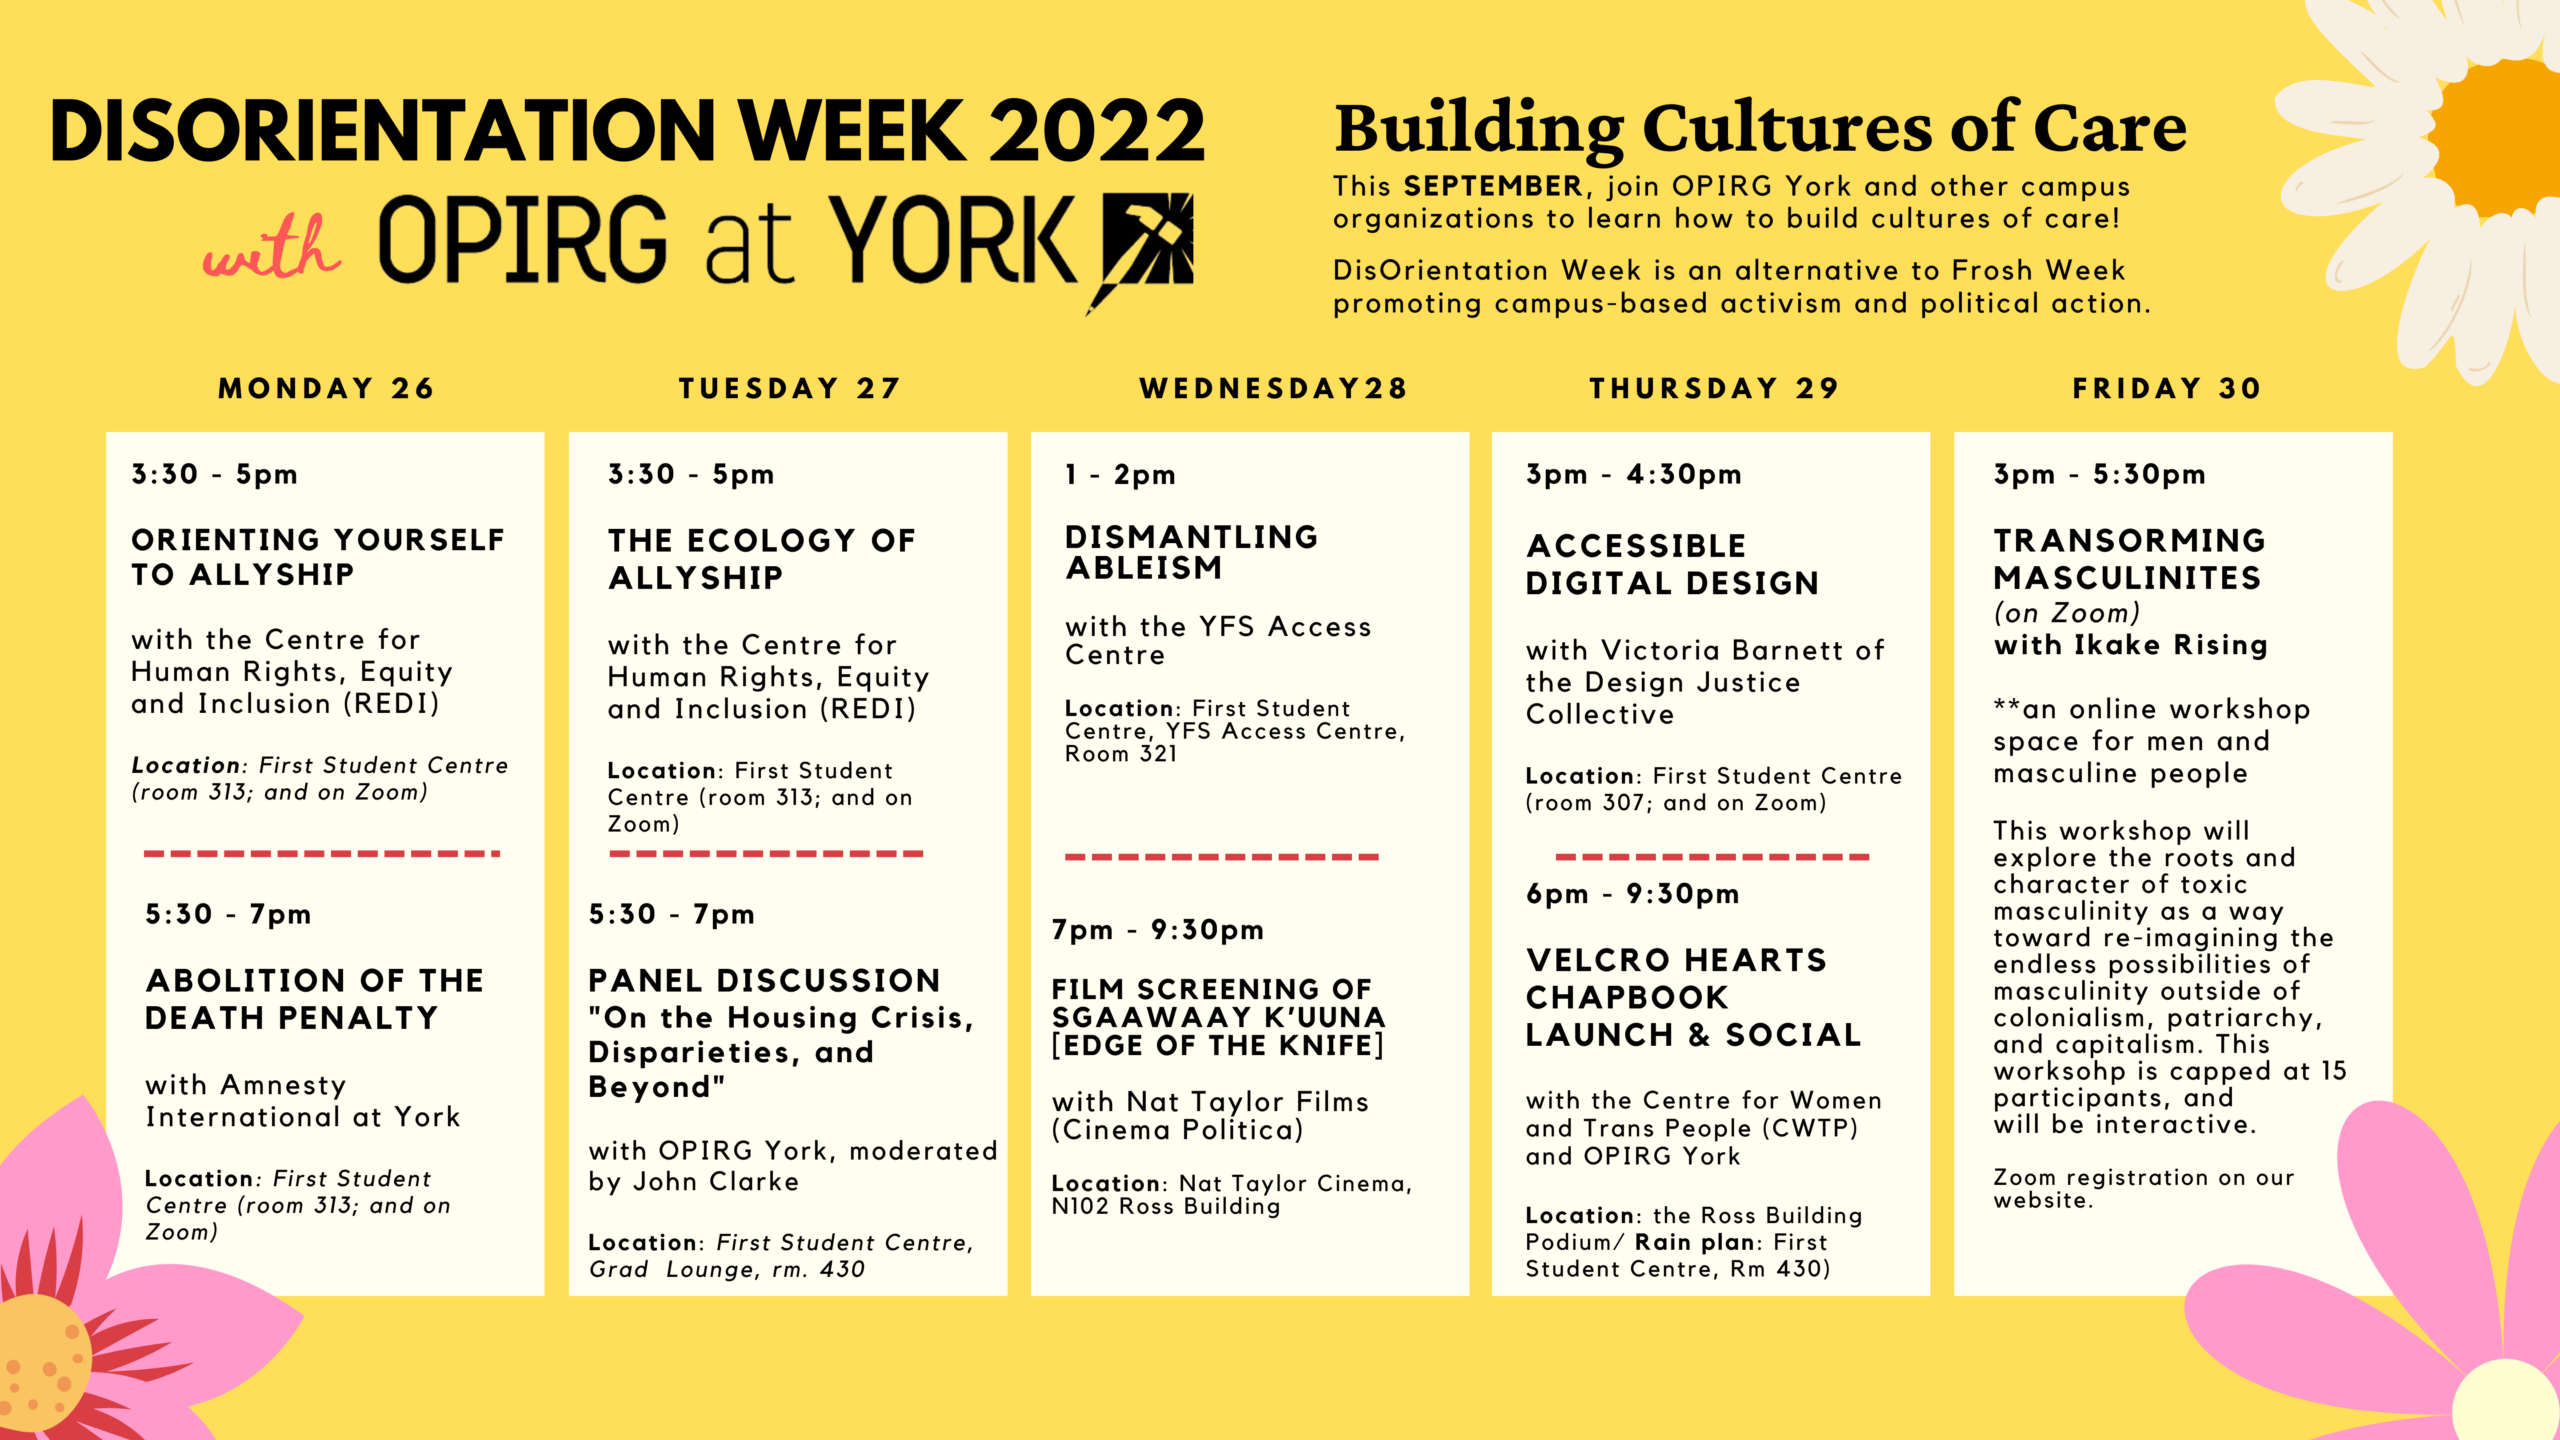 Building Cultures of Care/ SEPTEMBER 26-30, 2022/ DisOrienation Week is an alternative to/ Frosh Week promoting campus-based activism and political action./ Join OPIRG York and our community partners for a series of in-person and online events. A pink background with bold flowers in three of the corners. There is a heading in bold black font that states: Disorientation Week 2022/ with OPIRG York. To the right of that is the text: Building Cultures of Care/ This SEPTEMBER, join OPIRG York and other campus organizations to learn how to build cultures of care!/ DisOrienation Week is an alternative to Frosh Week promoting campus-based activism and political action. In white blocks there are five sections: Monday 26/ 3:30 - 5pm Orienting yourself to Allyship with the Centre for Human Rights, Equity and Inclusion (REDI) Location: First Student Centre (room 313; and on Zoom) Monday 26, 5:30 - 7pm Abolition of the Death penalty with Amnesty International at York Location: First Student Centre (room 313; and on Zoom) Tuesday 27, 3:30 - 5pm The Ecology of allyship with the Centre for Human Rights, Equity and Inclusion (REDI) Location: First Student Centre (room 313; and on Zoom). Tuesday 27, 5:30 - 7pm Panel Discussion "On the Housing Crisis, Disparieties, and Beyond" with OPIRG York, moderated by John Clarke Location: First Student Centre, Grad Lounge, rm. 430. Wednesday 28, 1 - 2pm Dismantling ableism with the YFS Access Centre Location: First Student Centre, YFS Access Centre, Room 321; Wednesday 28, 7pm - 9:30pm Film screening of Sgaawaay K’uuna [Edge of the Knife] with Nat Taylor Films (Cinema Politica) Location: Nat Taylor Cinema, N102 Ross Building. Thursday 29, 3pm - 4:30pm Accessible Digital Design with Victoria Barnett of the Design Justice Collective Location: First Student Centre (room 307; and on Zoom). Thurs 29/ 6pm - 9:30pm Velcro Hearts Chapbook Launch & Social with the Centre for Women and Trans People (CWTP) and OPIRG York Location: the Ross Building Podium/ Rain plan: First Student Centre, Rm 430) Friday 30 3pm - 5:30pm /Transforming Masculinity & Moving Towards Collective Healing/ (on Zoom)/ with Ikake Rising/ **an online workshop space for men and masculine people; register for Zoom link